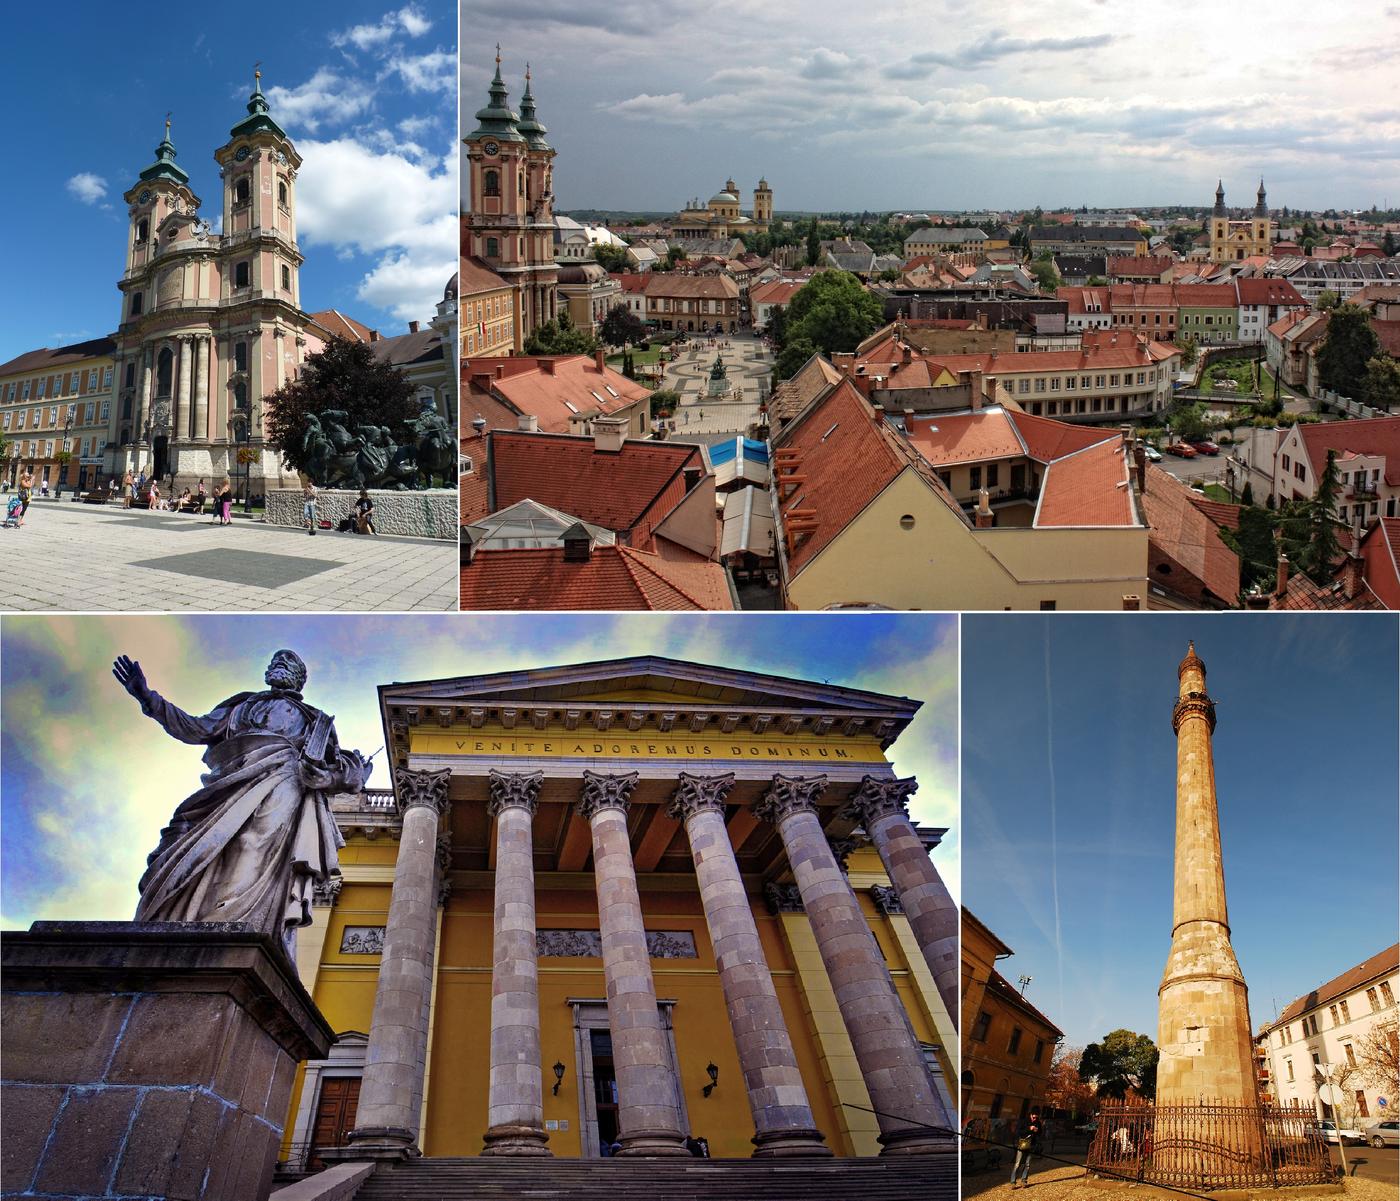 Eger: Time travel to the heart of Hungary